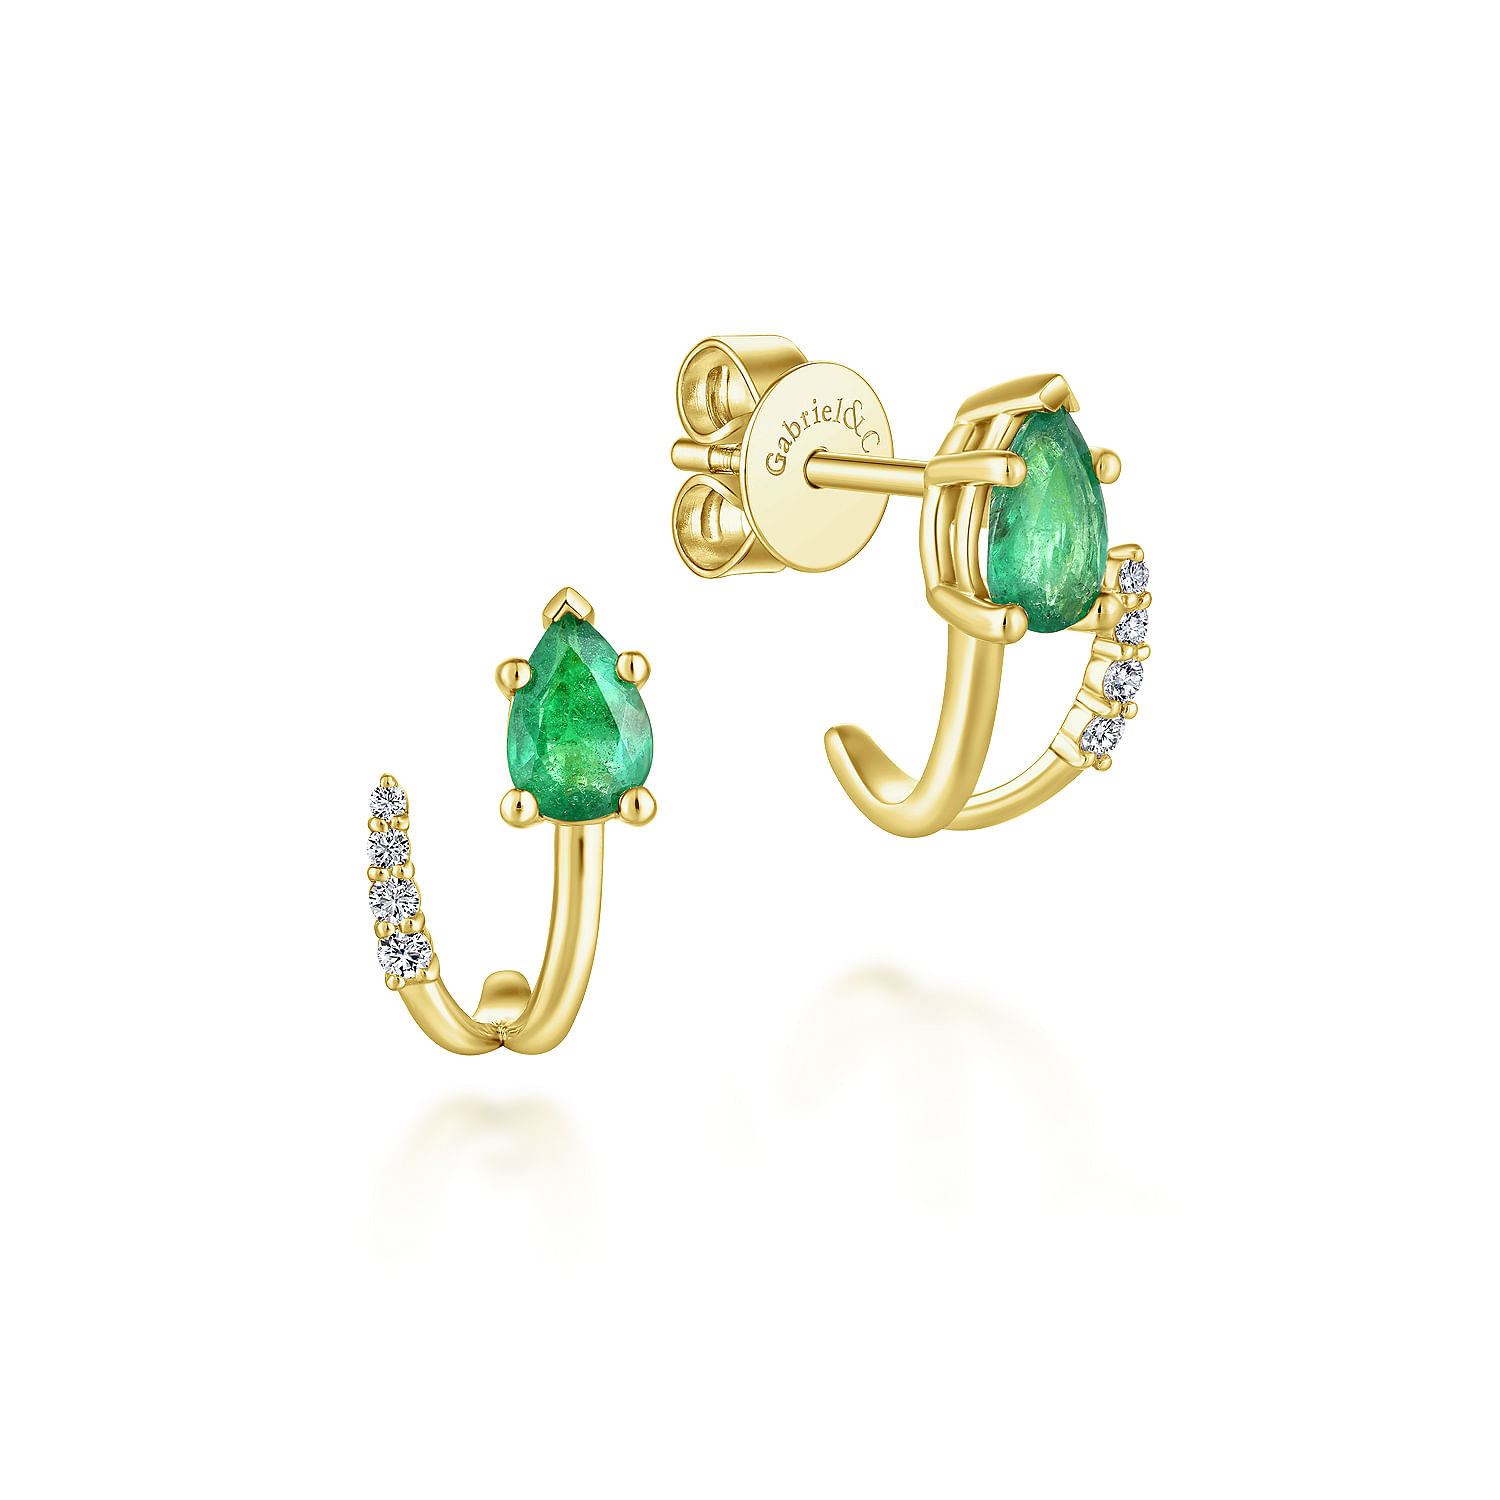 14K Yellow Gold Pear Shaped Emerald and Diamond J Curve Stud Earrings